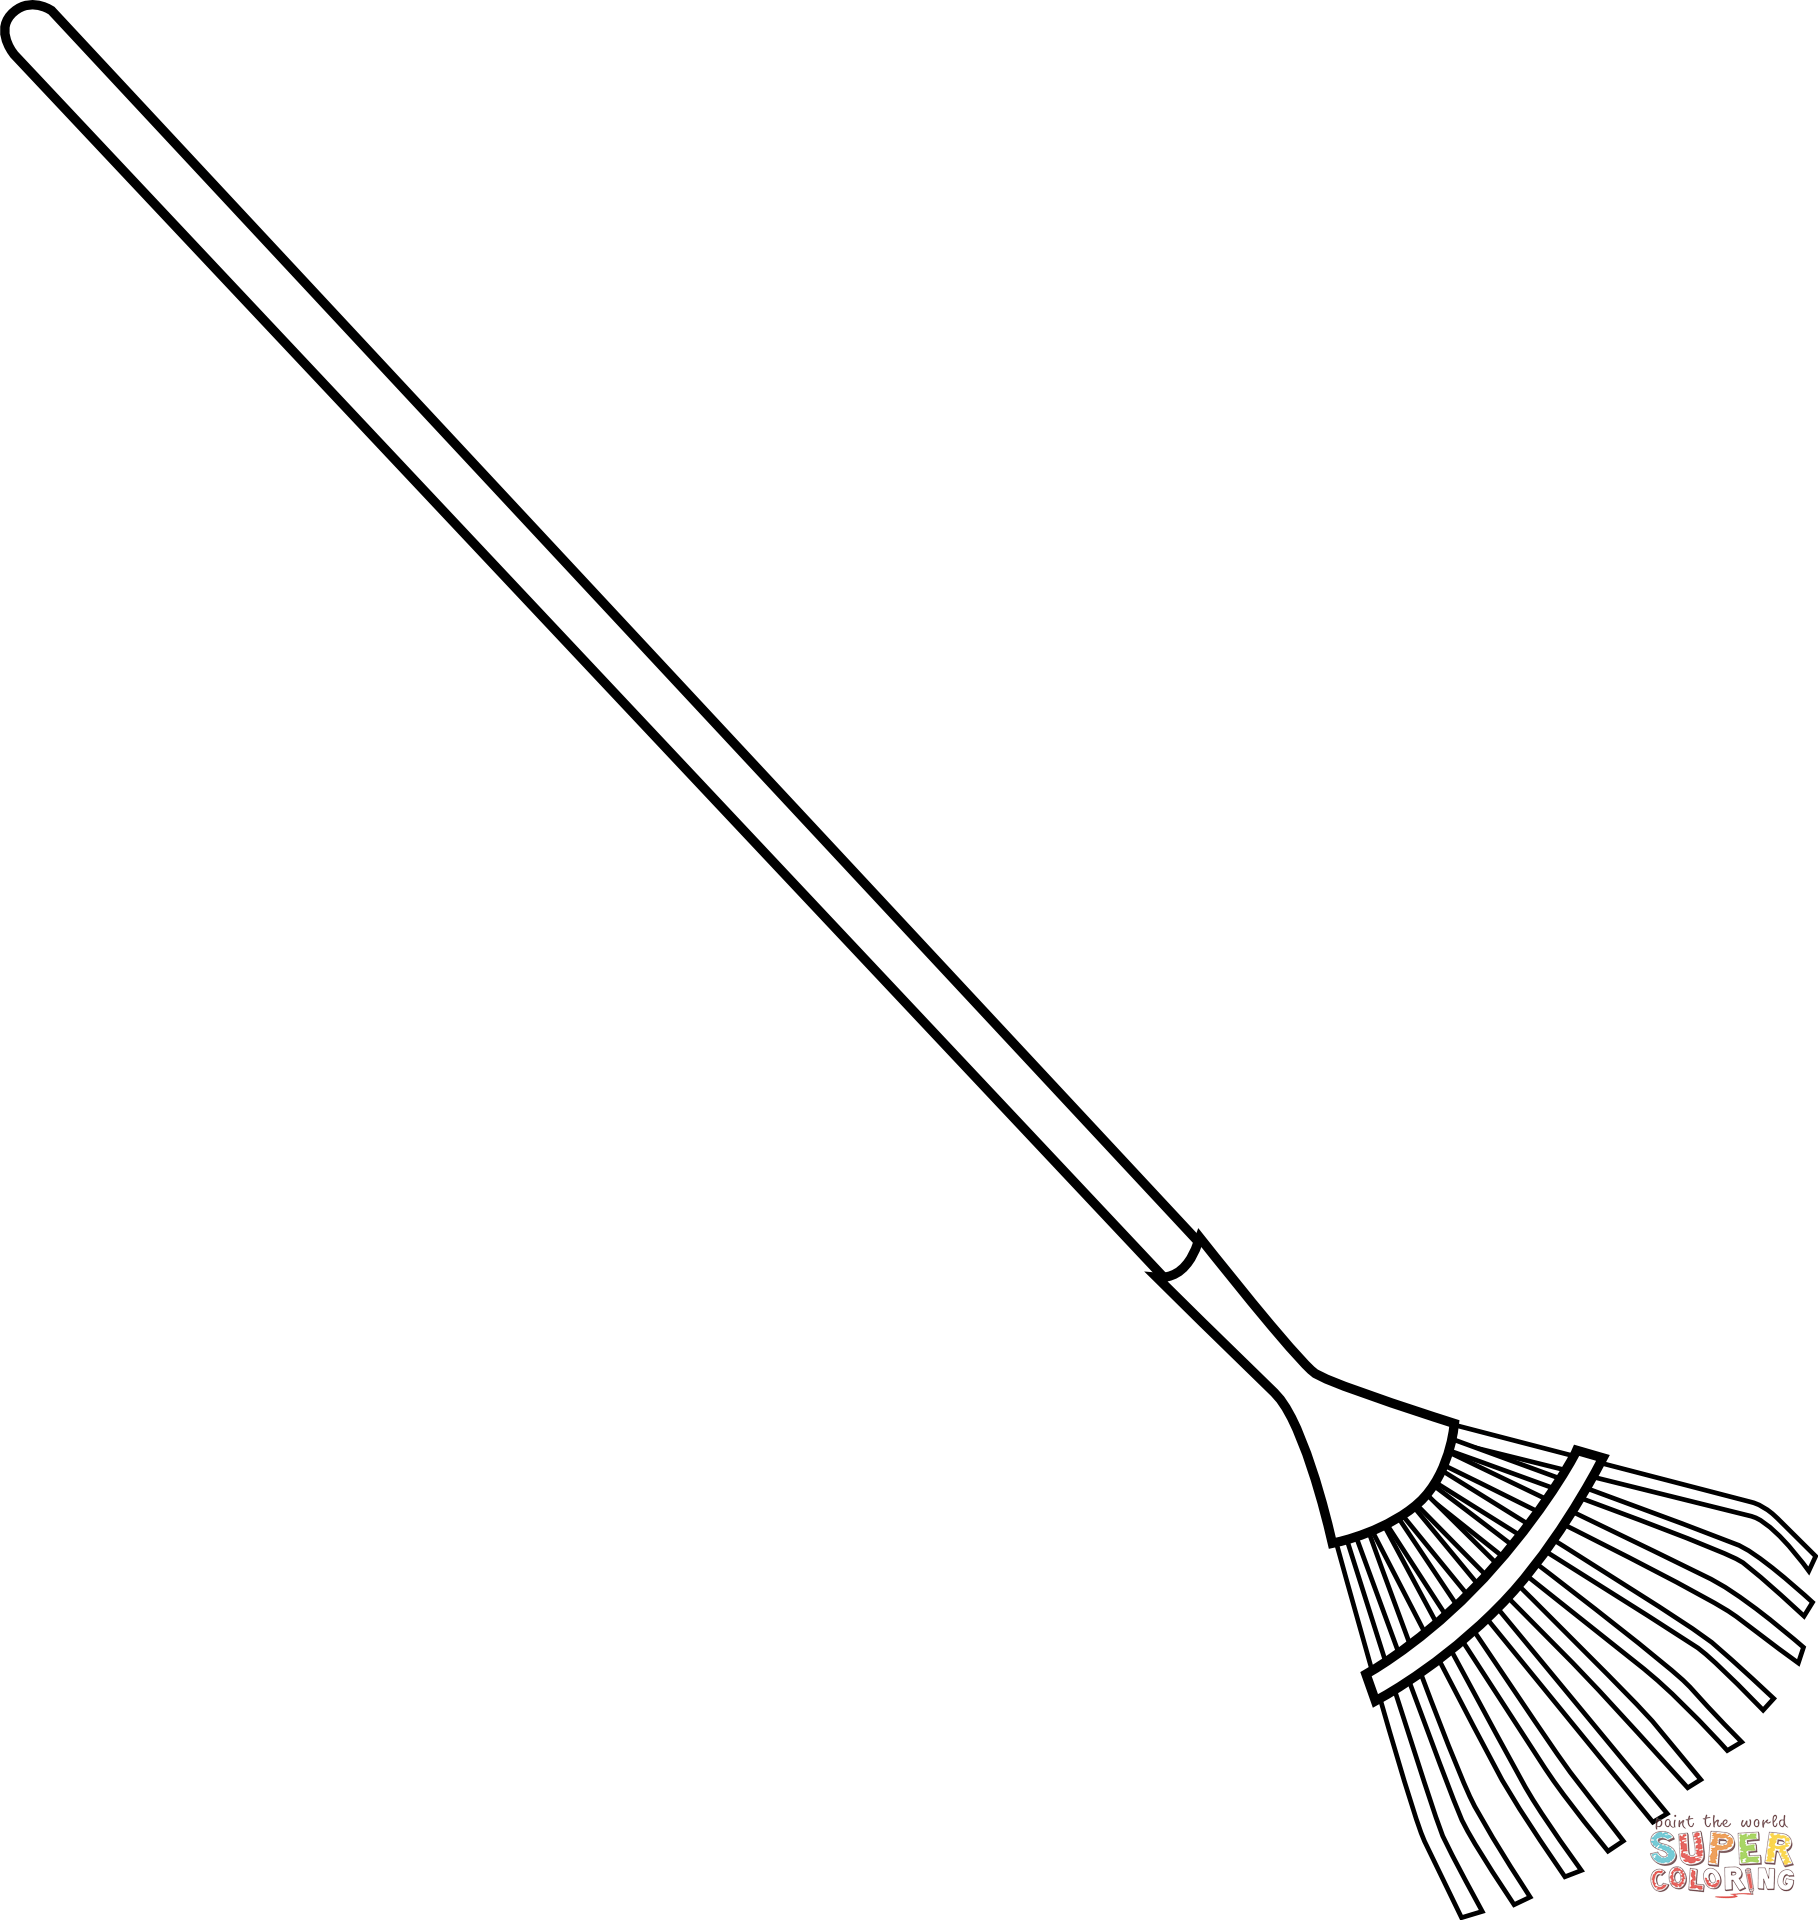 Rake coloring page free printable coloring pages